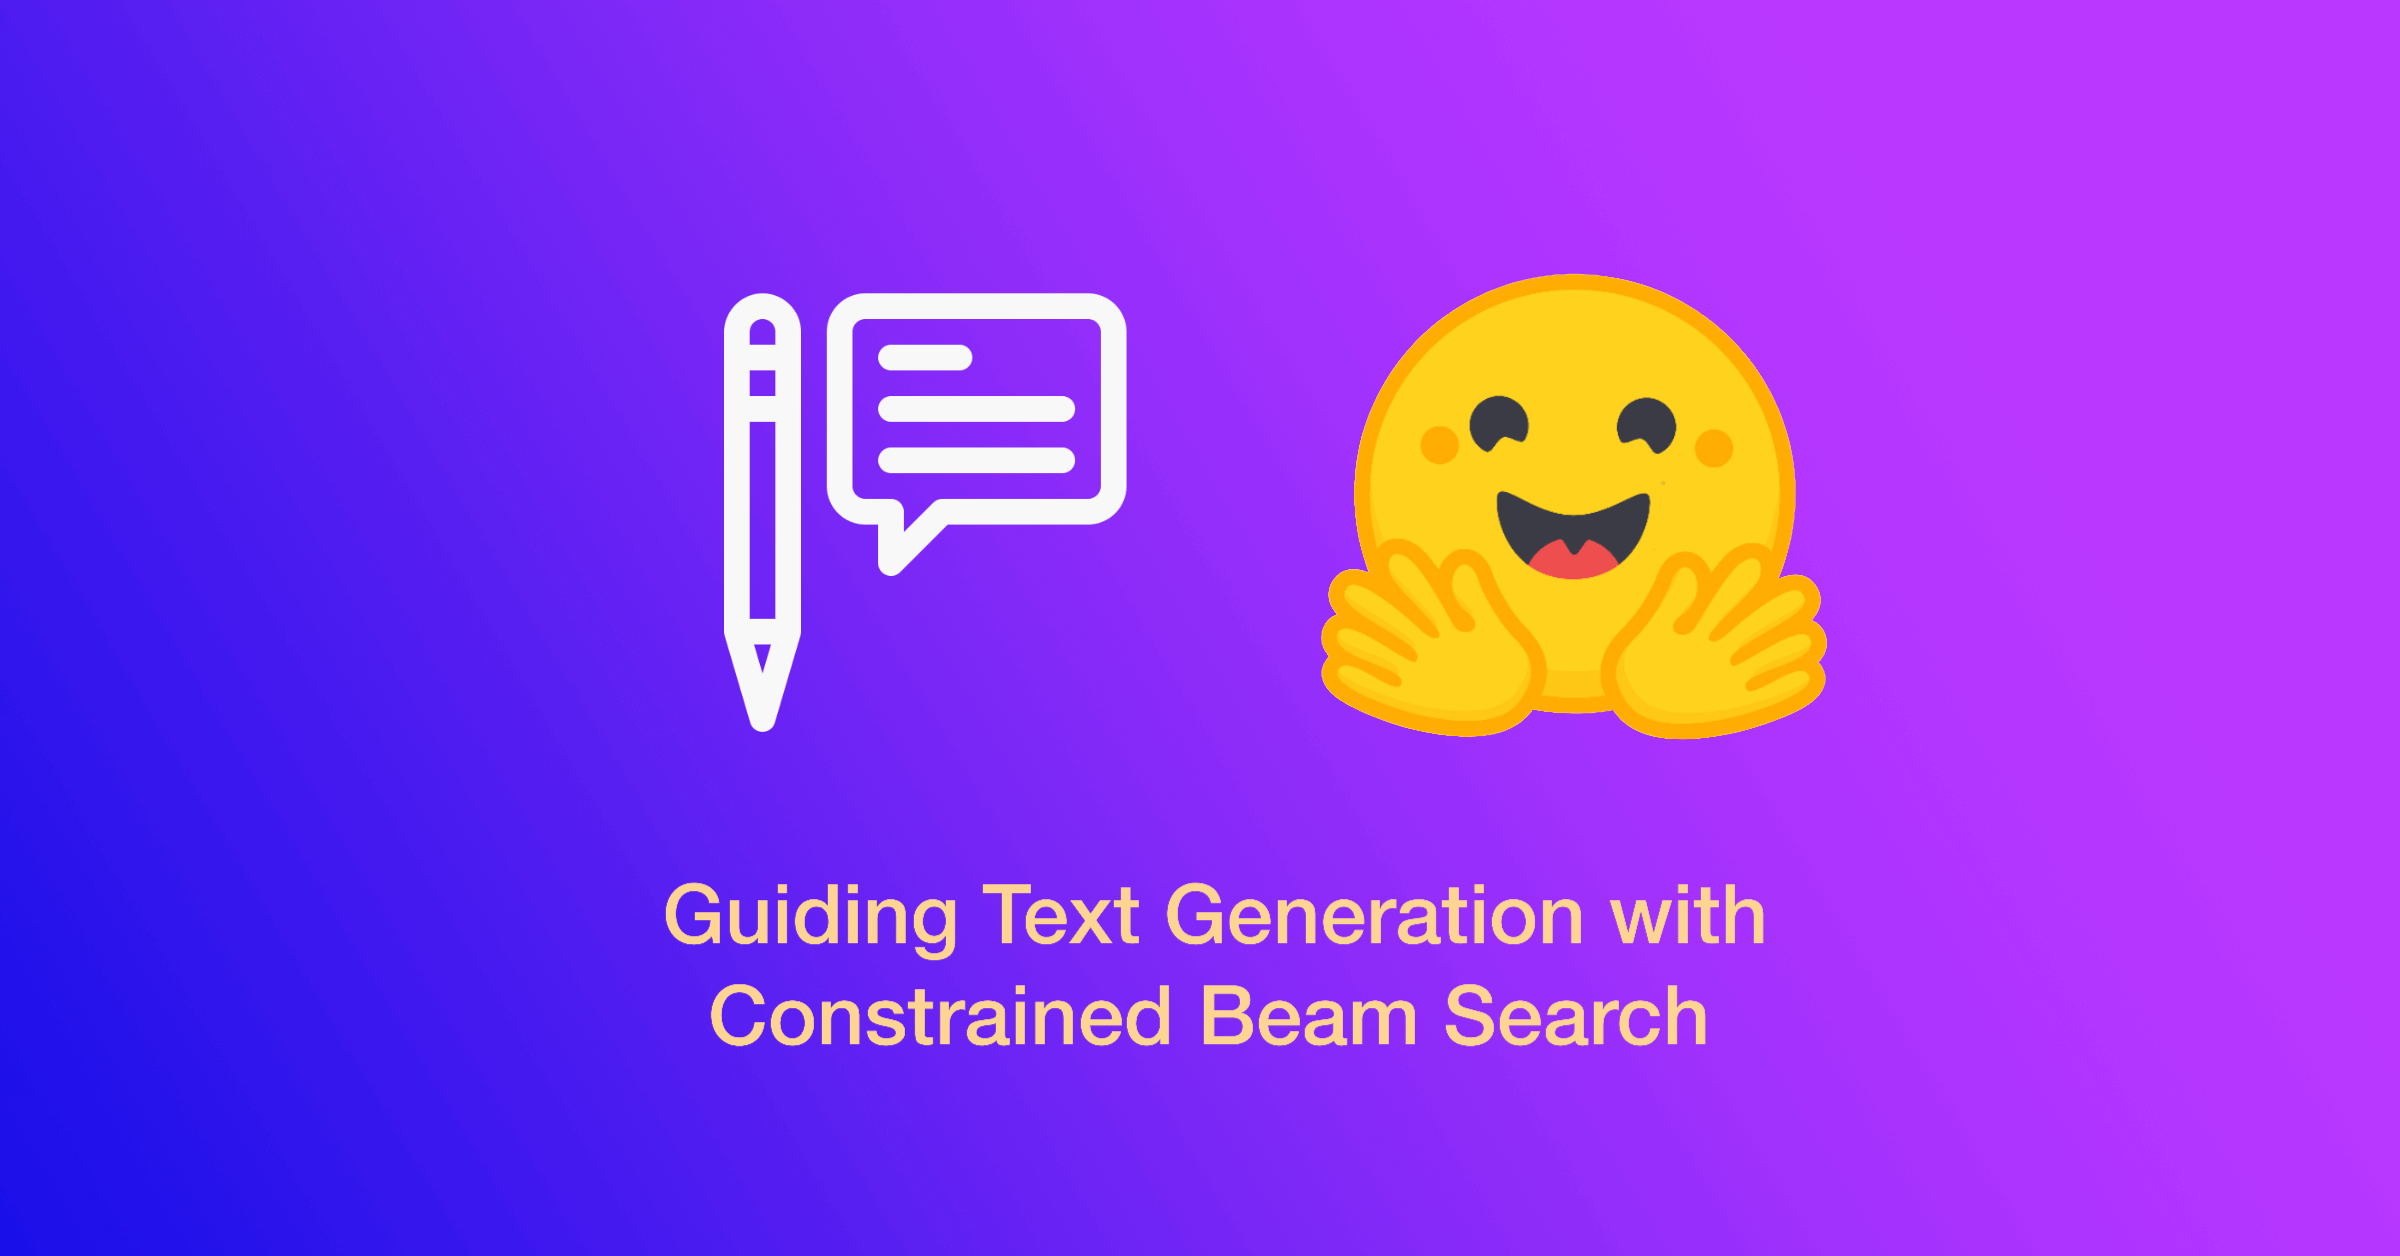 Constrained Beam Search